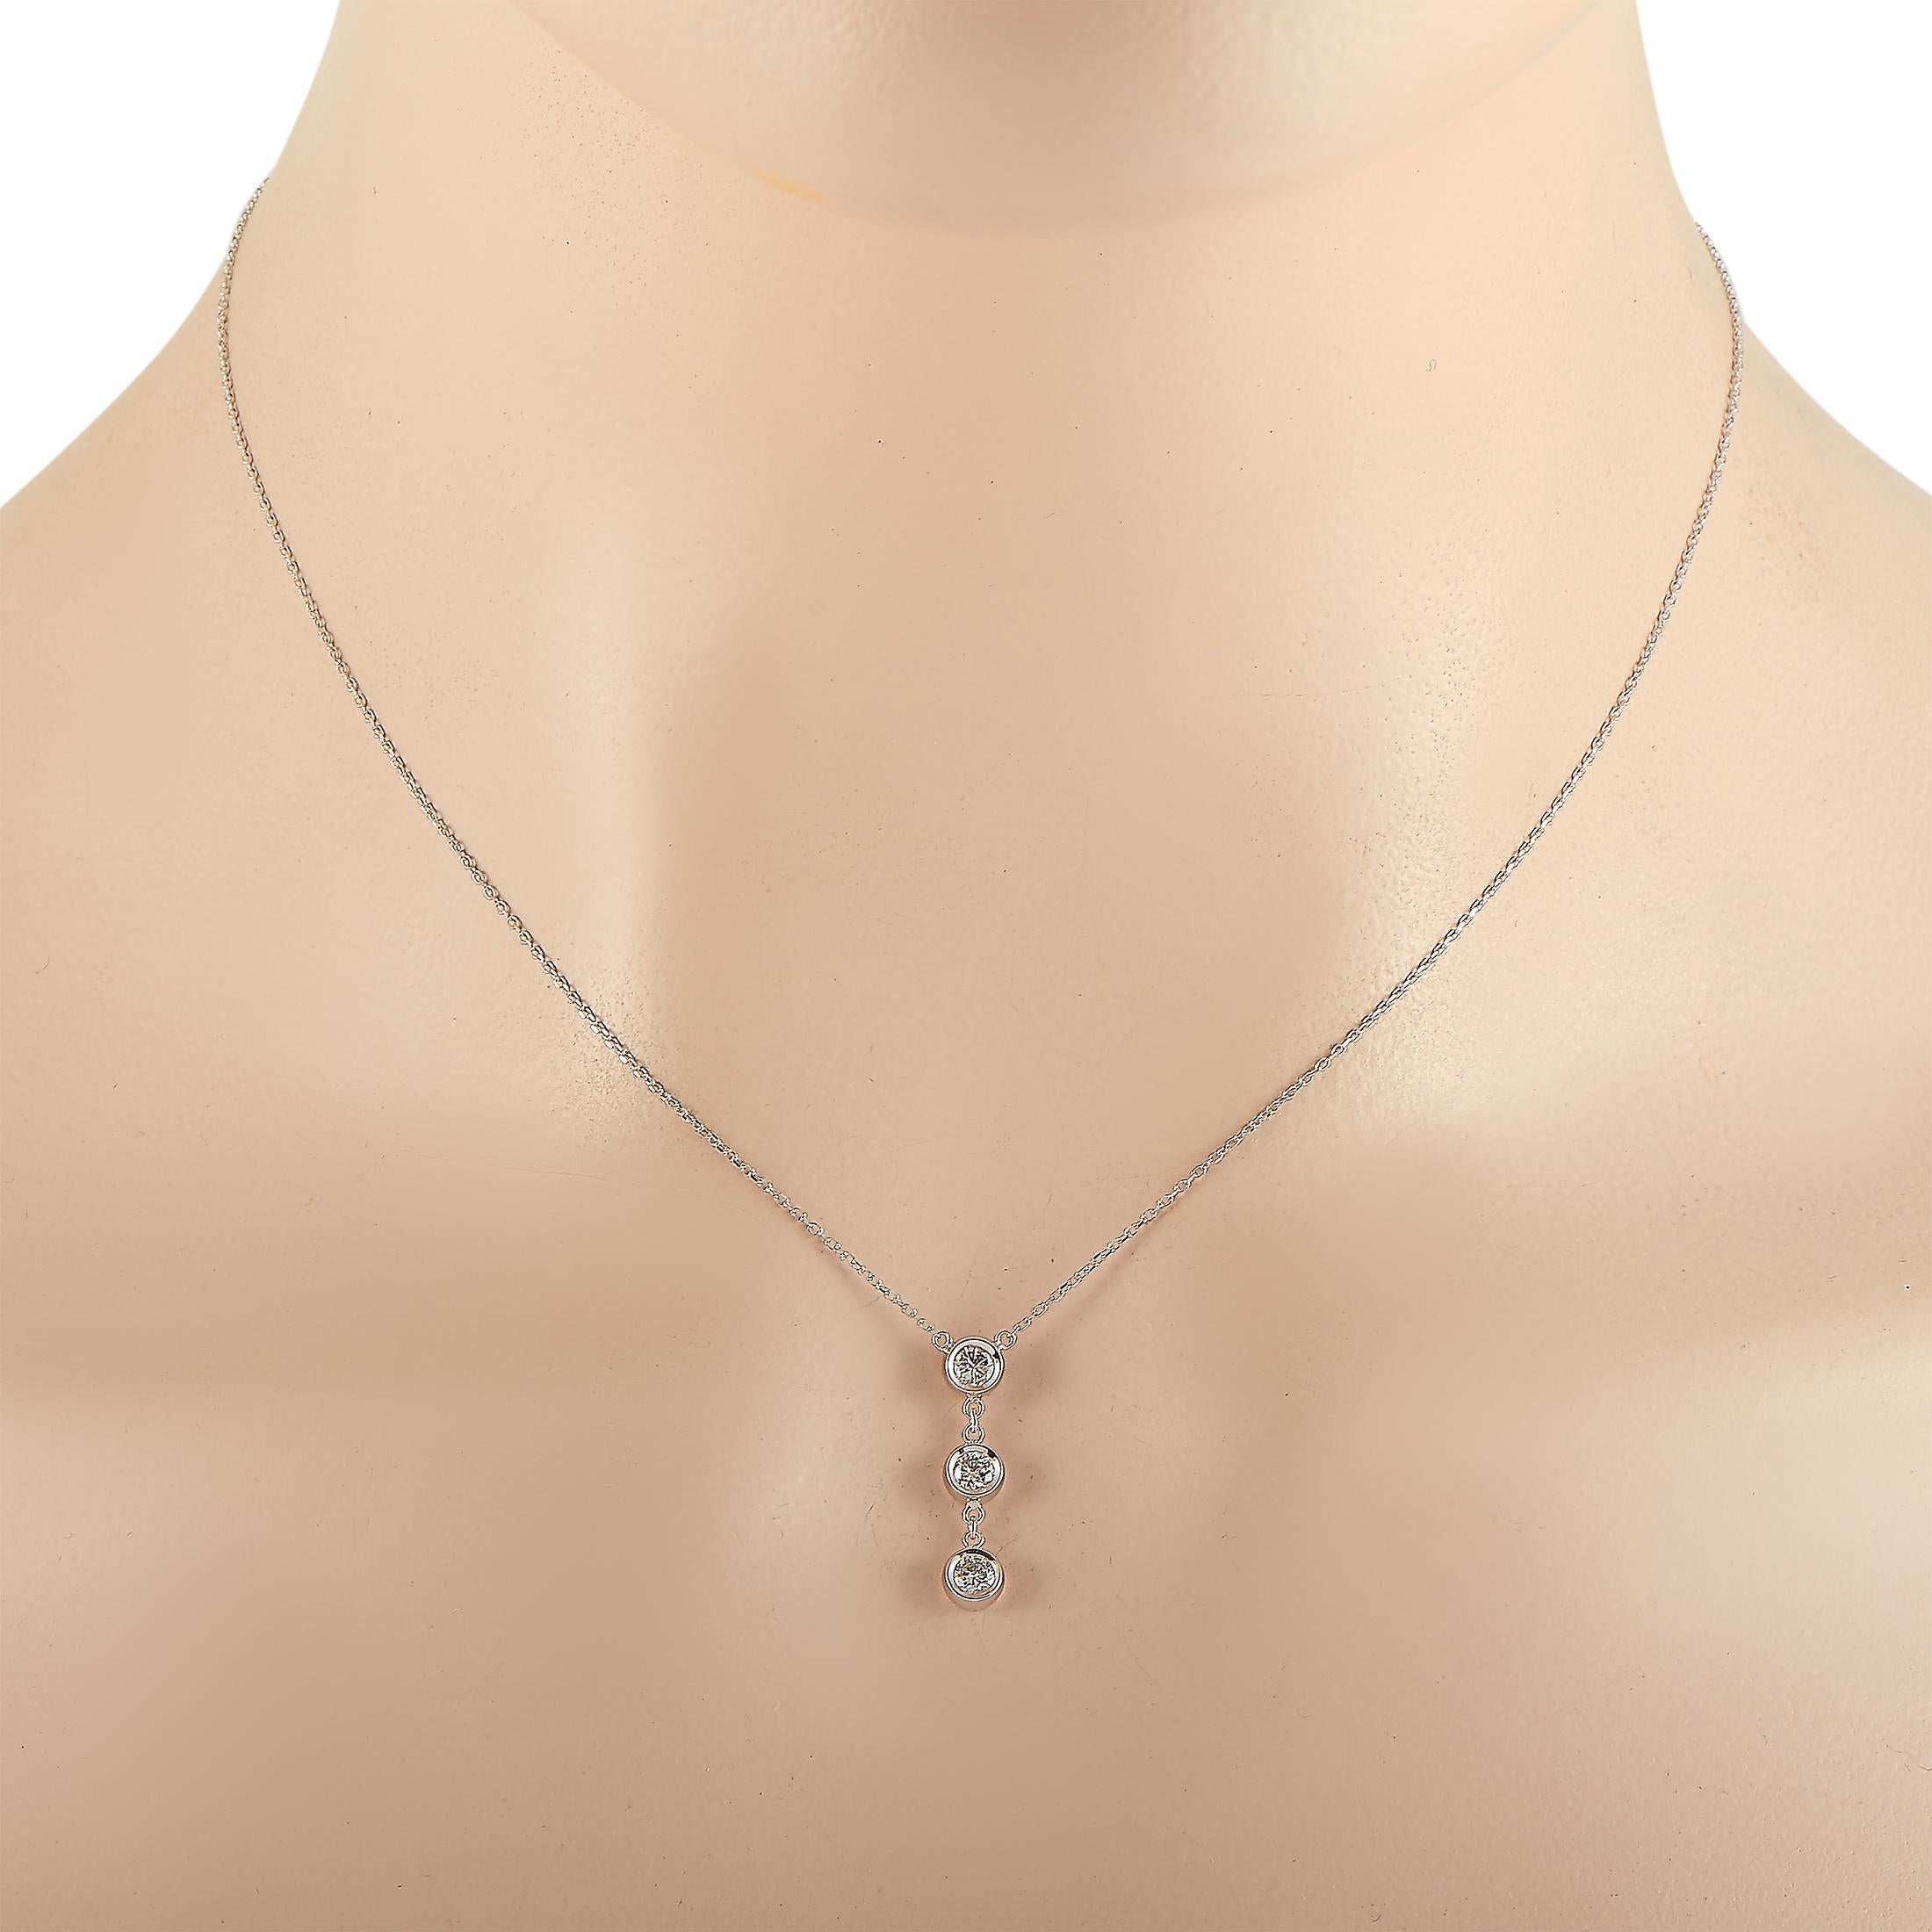 This LB Exclusive necklace is crafted from 14K white gold and weighs 1.9 grams. It is presented with a 16” chain and boasts a pendant that measures 0.75” in length and 0.15” in width. The necklace is set with diamonds that total 0.35 carats.
 
